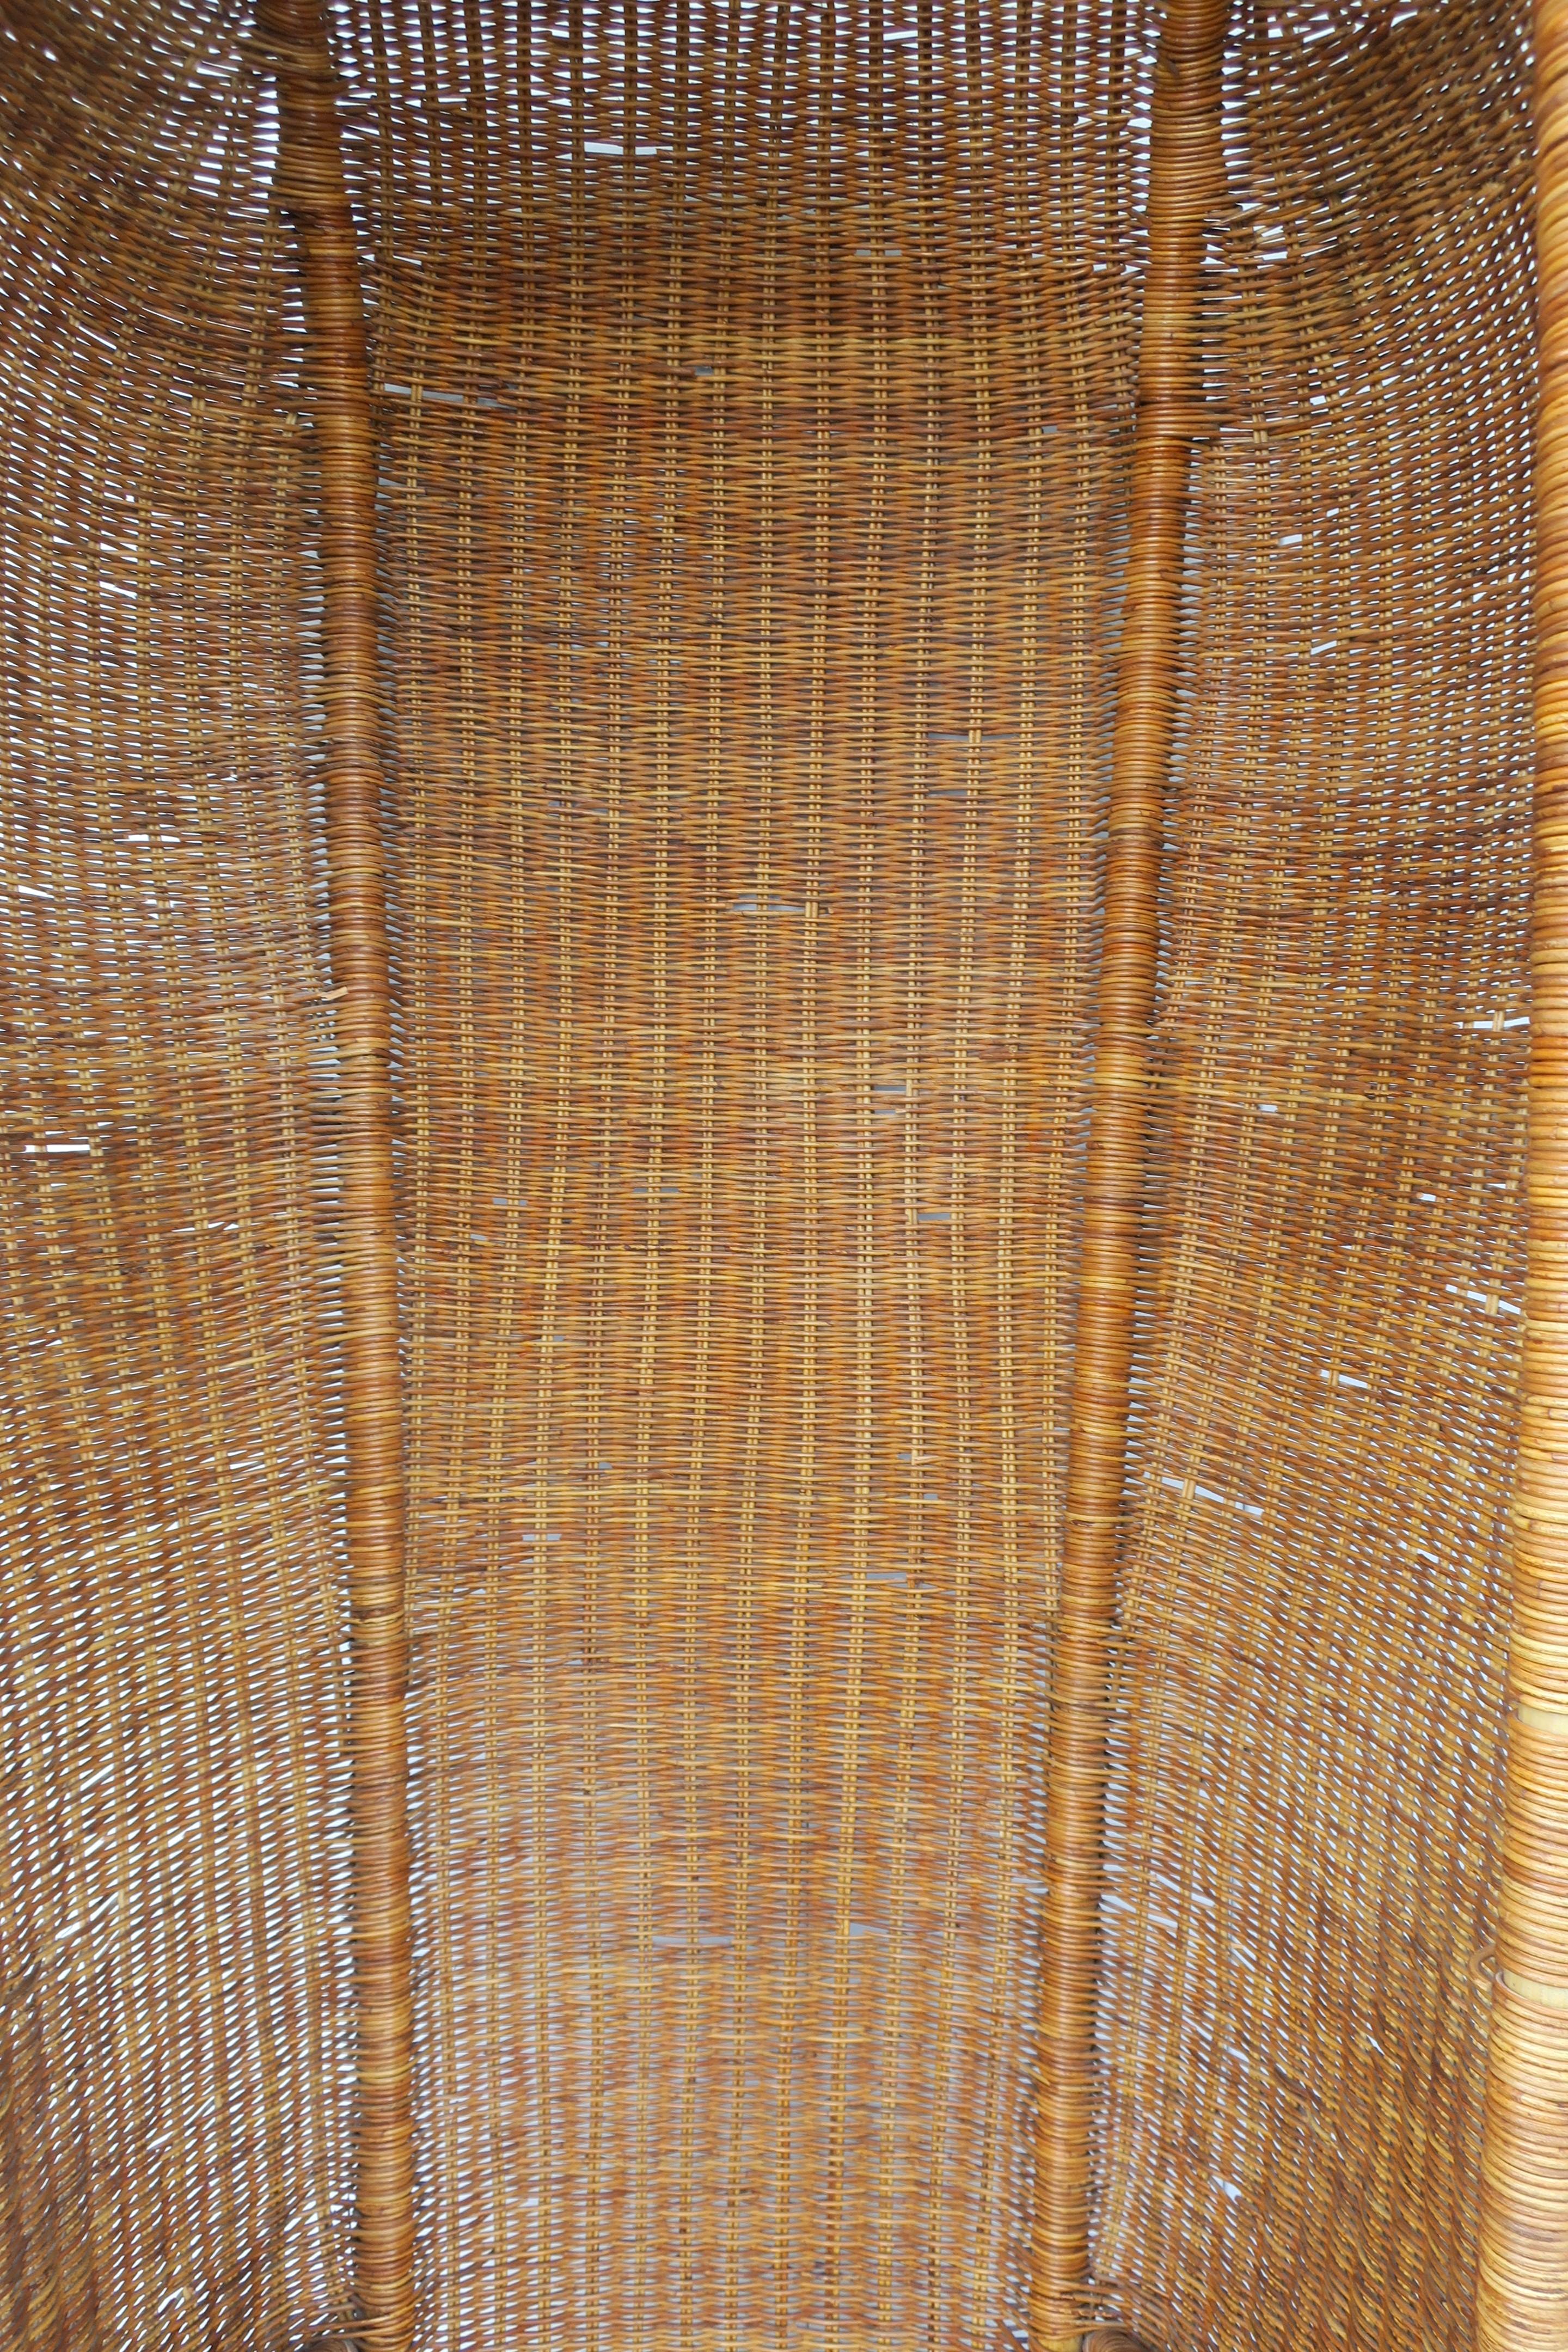 Tall Wicker Canopy Chair Bohemian 1970s For Sale 11